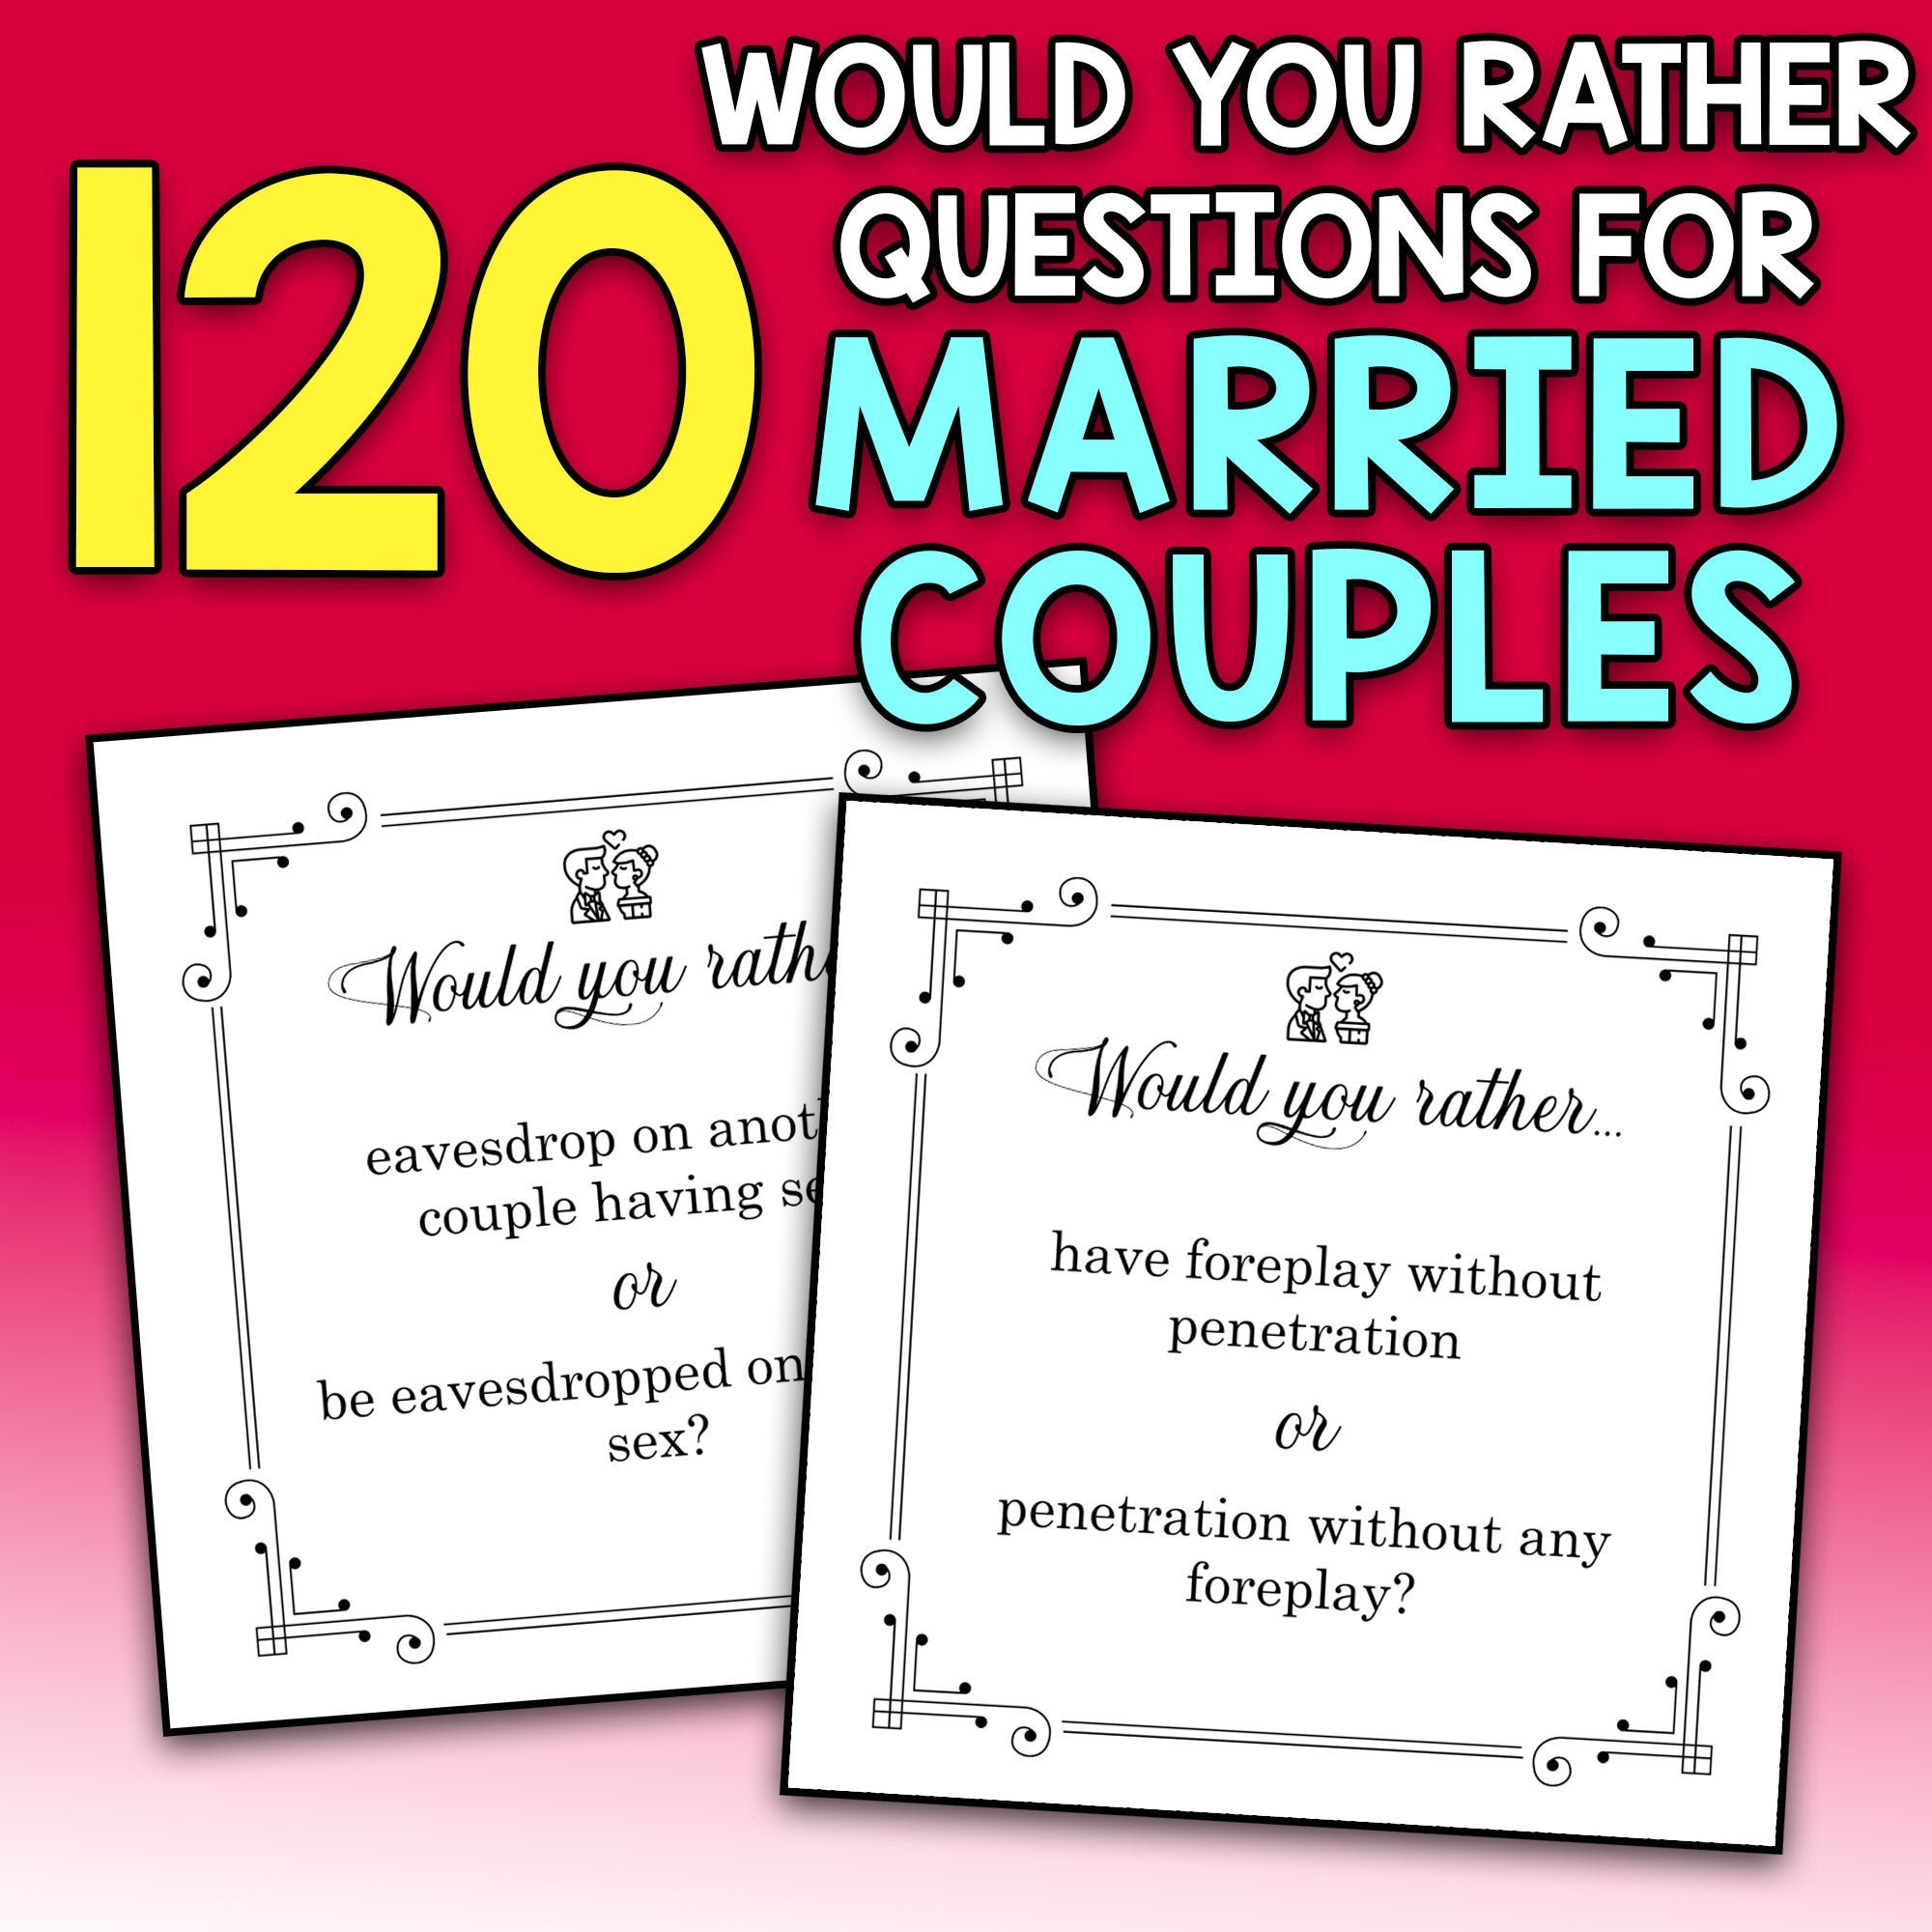 BEST VALUE 120 Would You Rather Questions for Married Couples photo